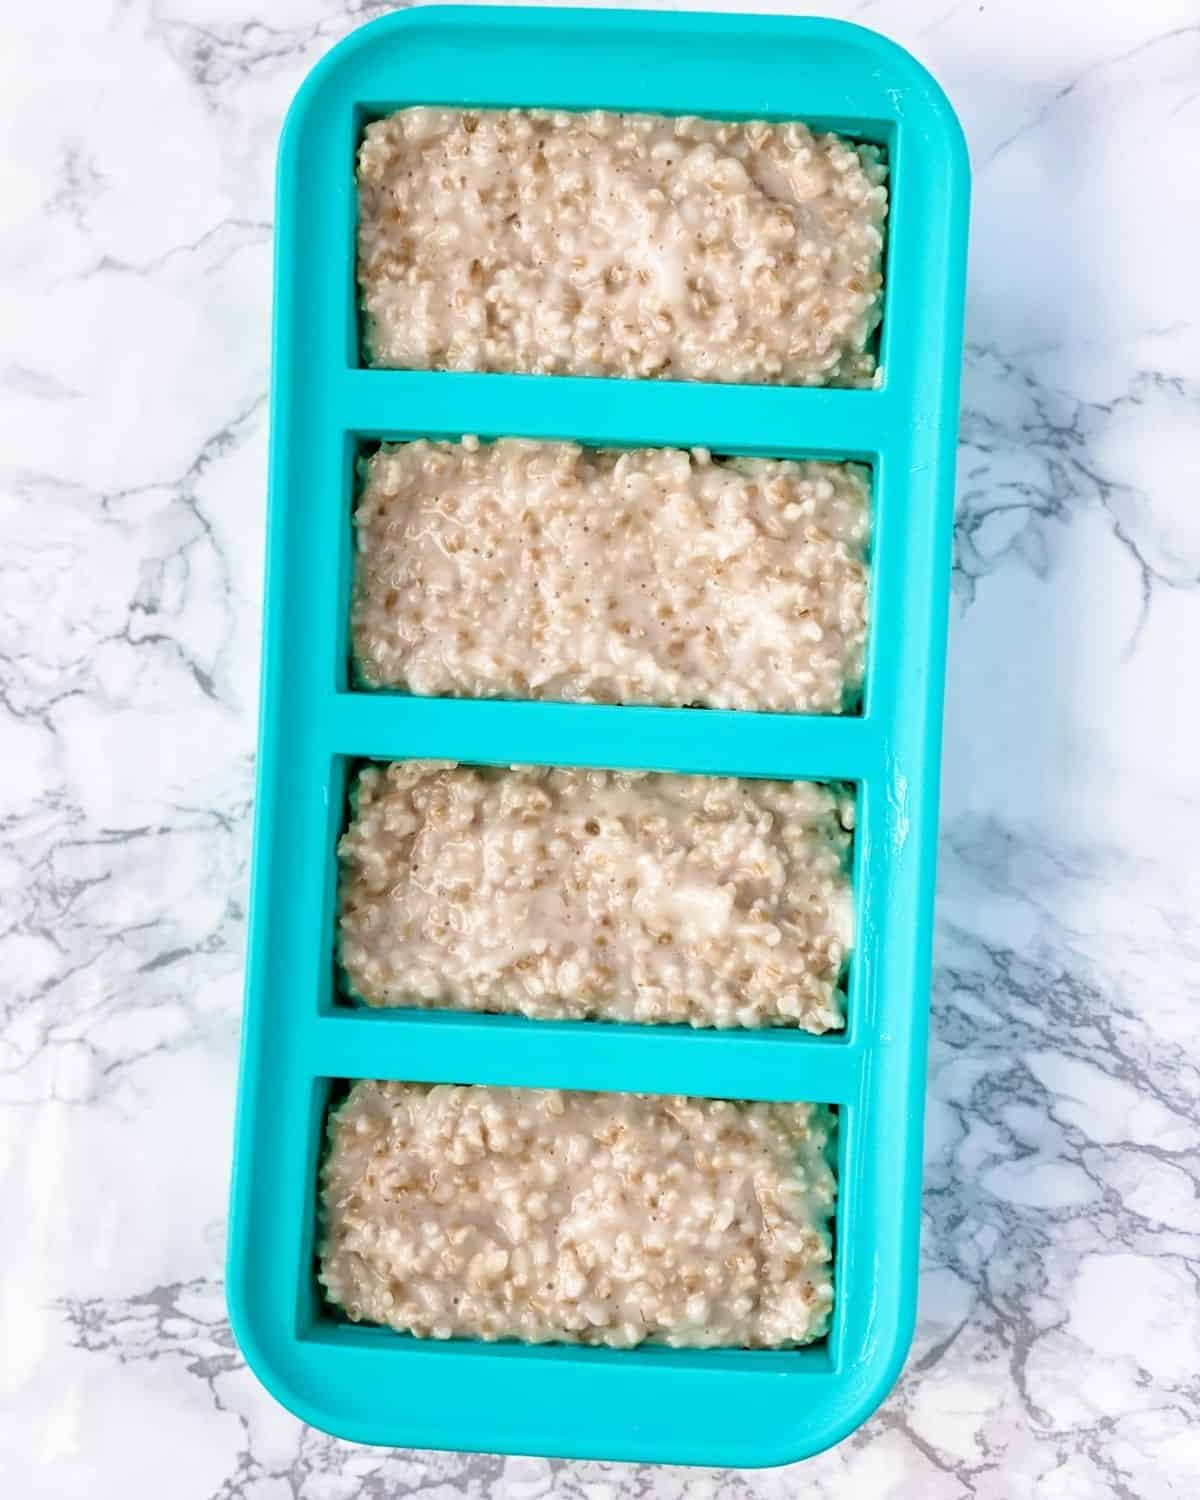 steel cut oats in Souper cube container.